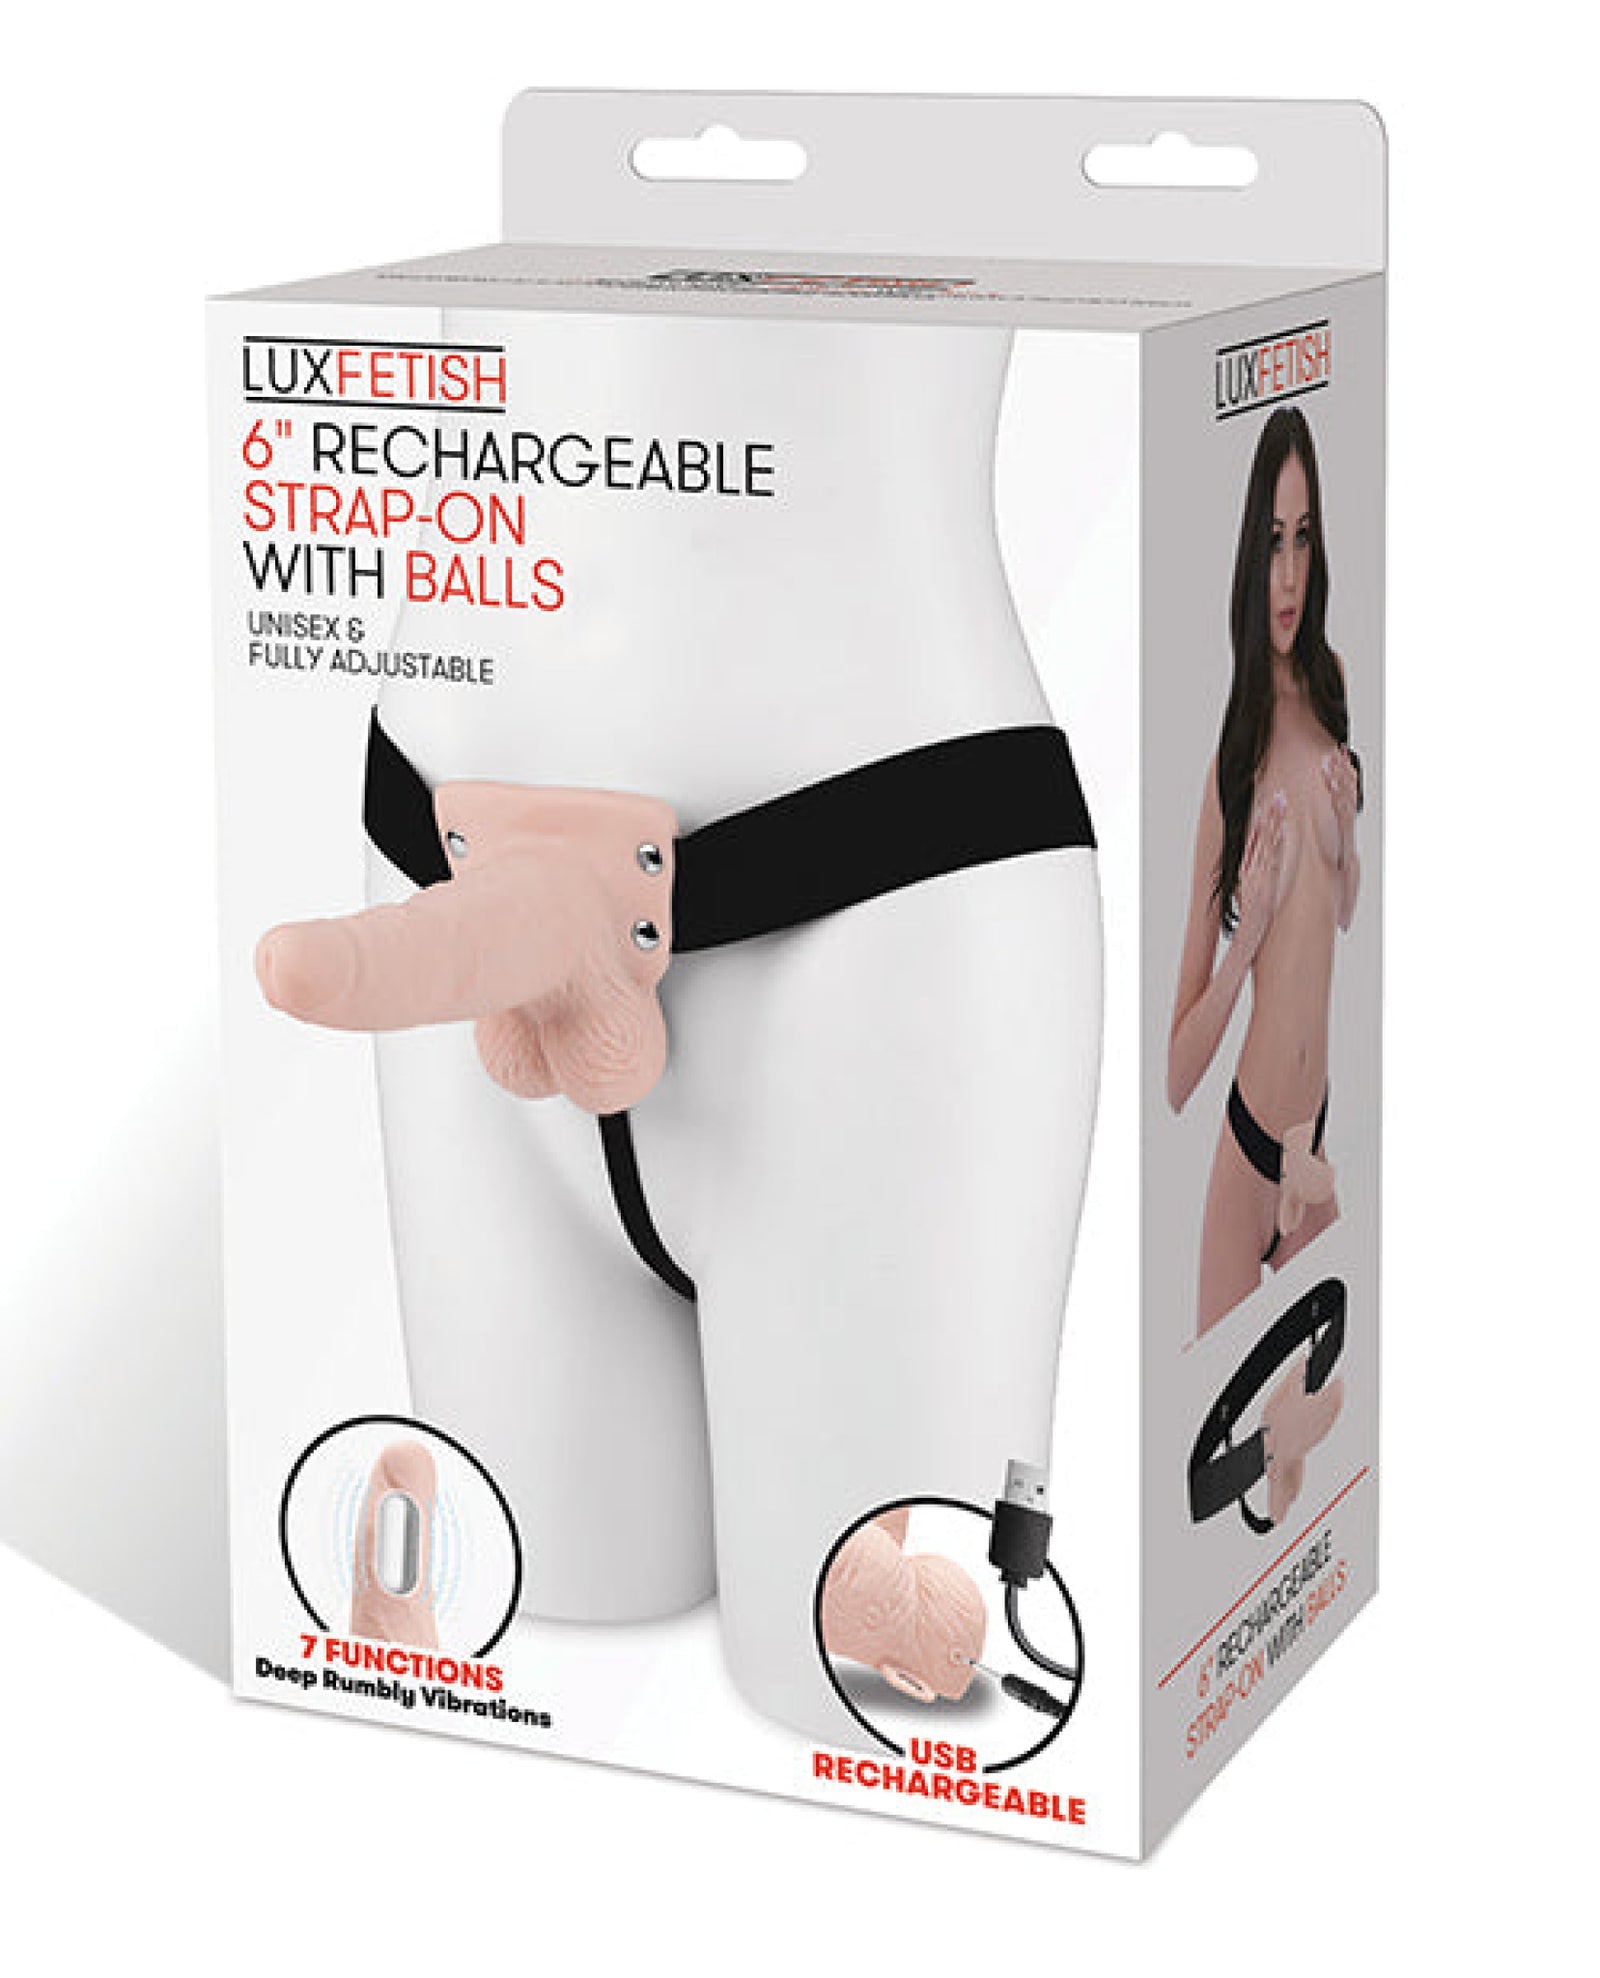 Lux Fetish 6" Rechargeable Strap On W/balls Lux Fetish